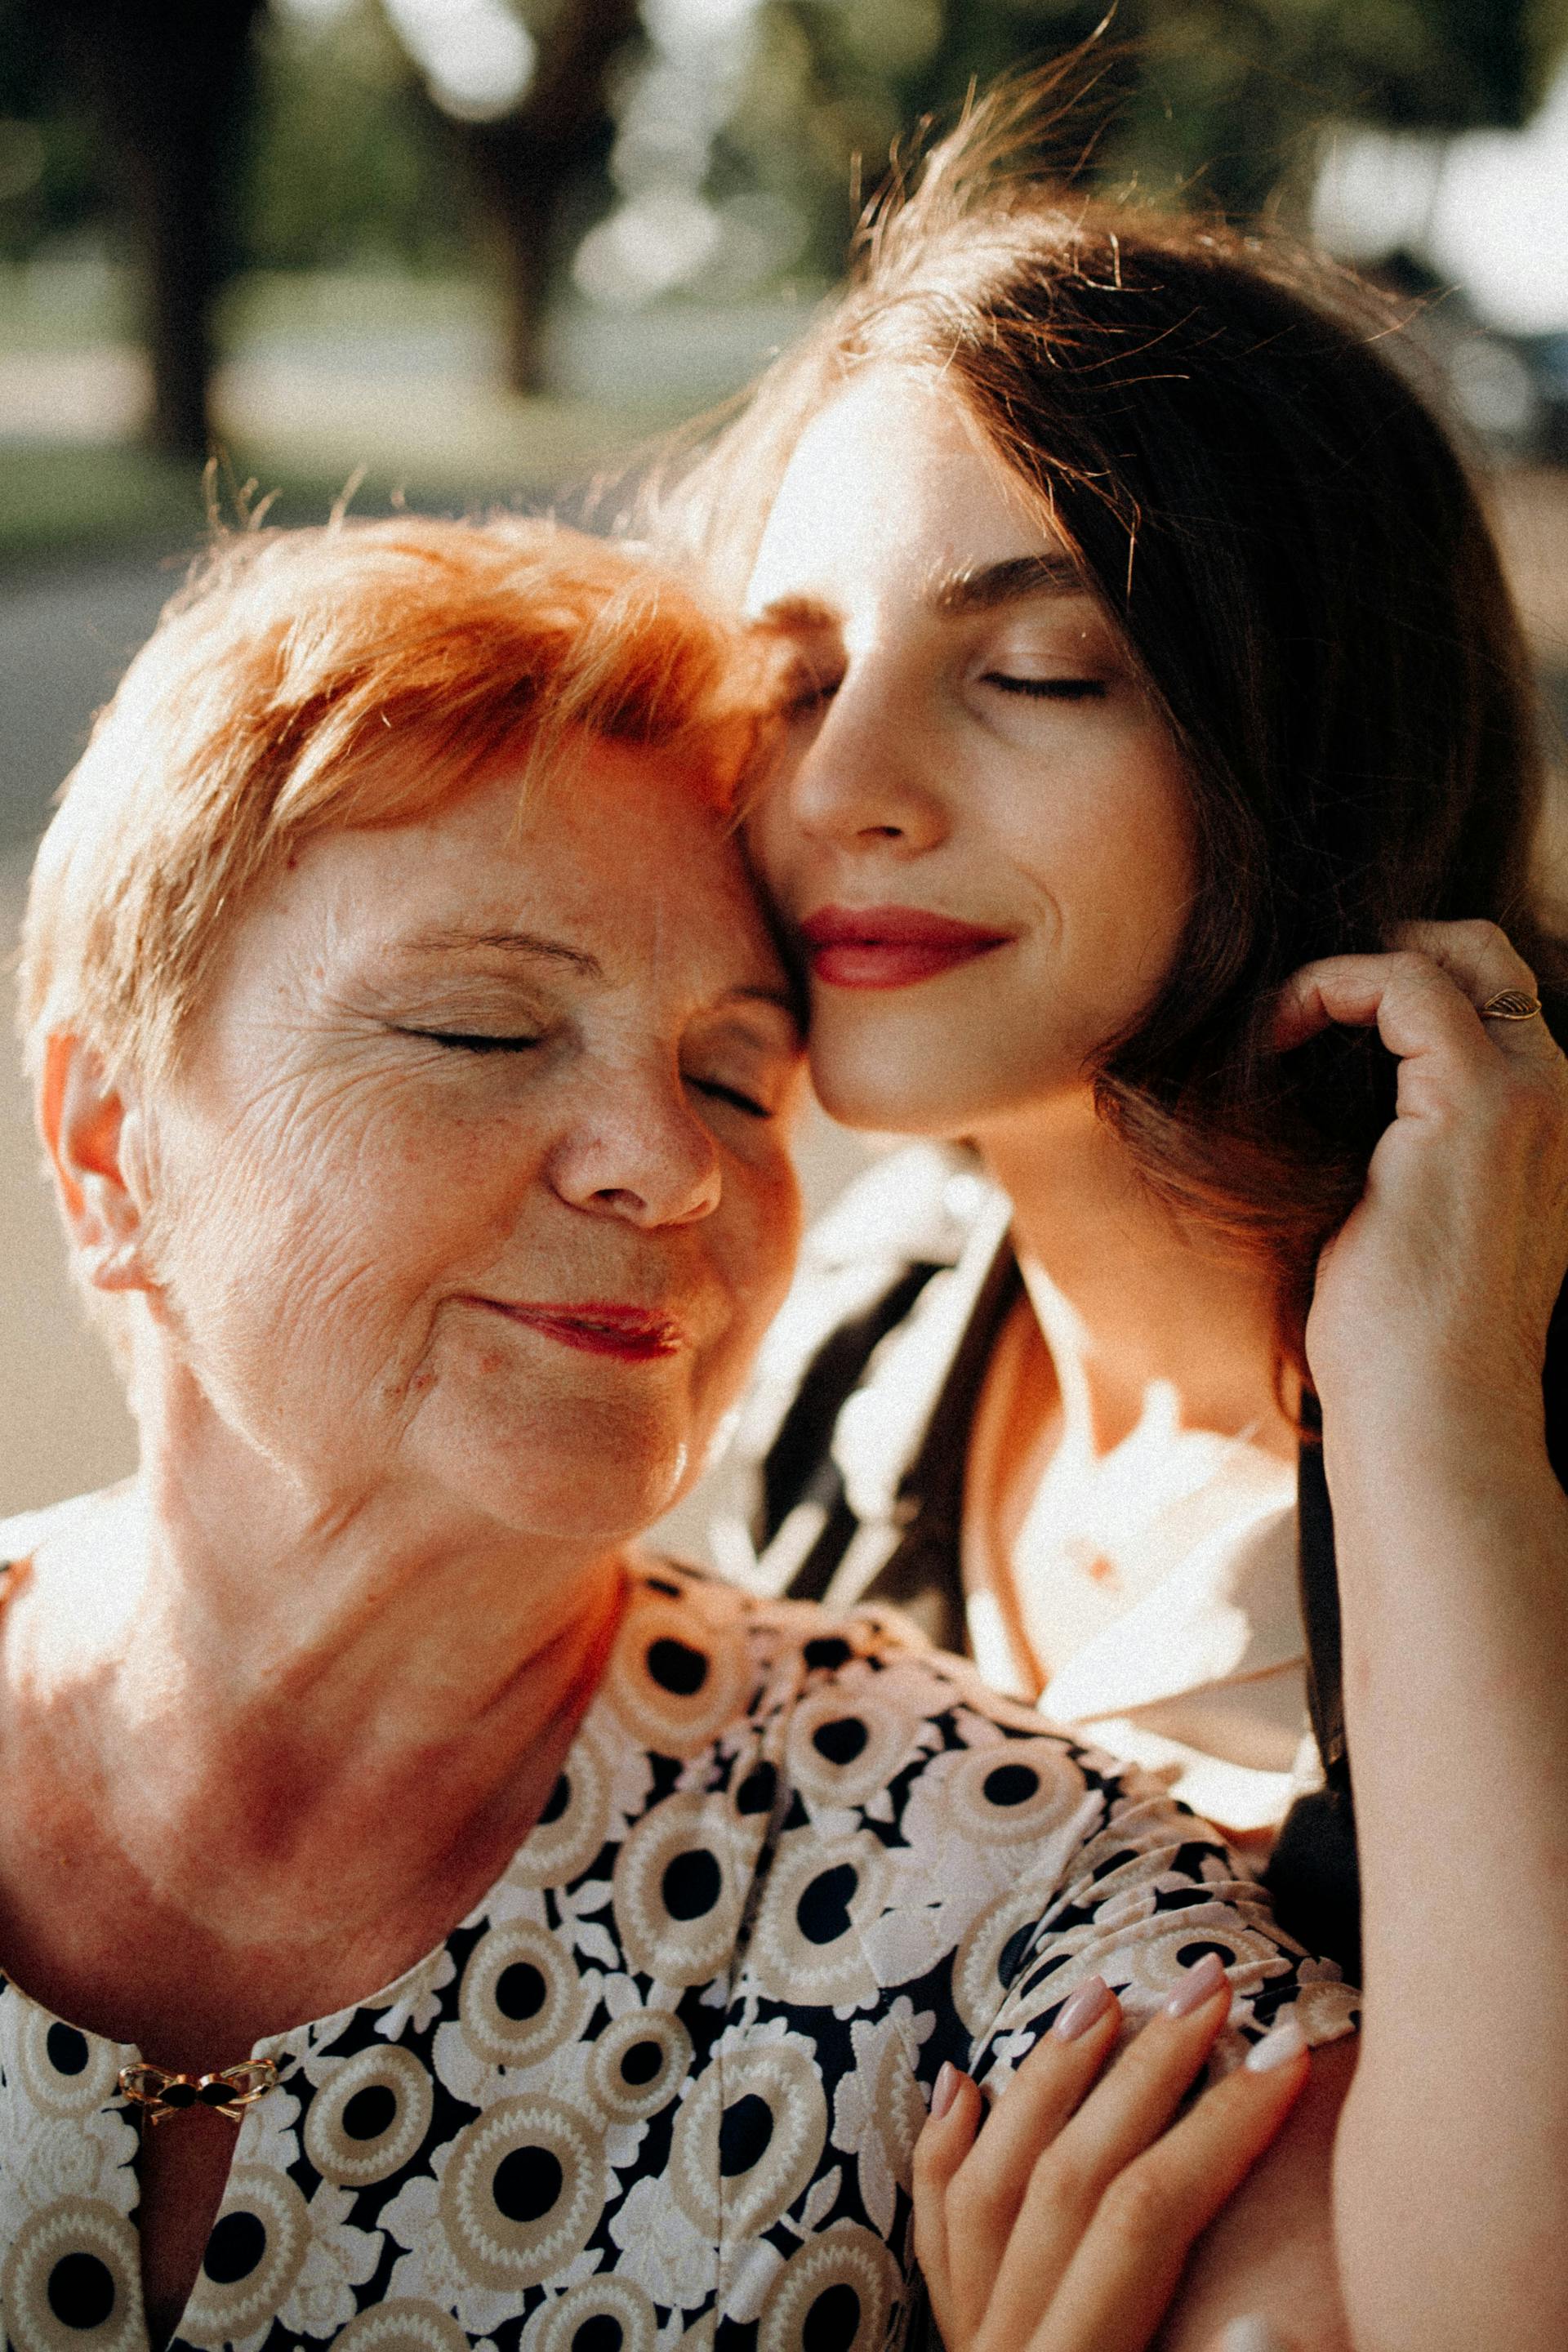 A mother and daughter embracing | Source: Pexels